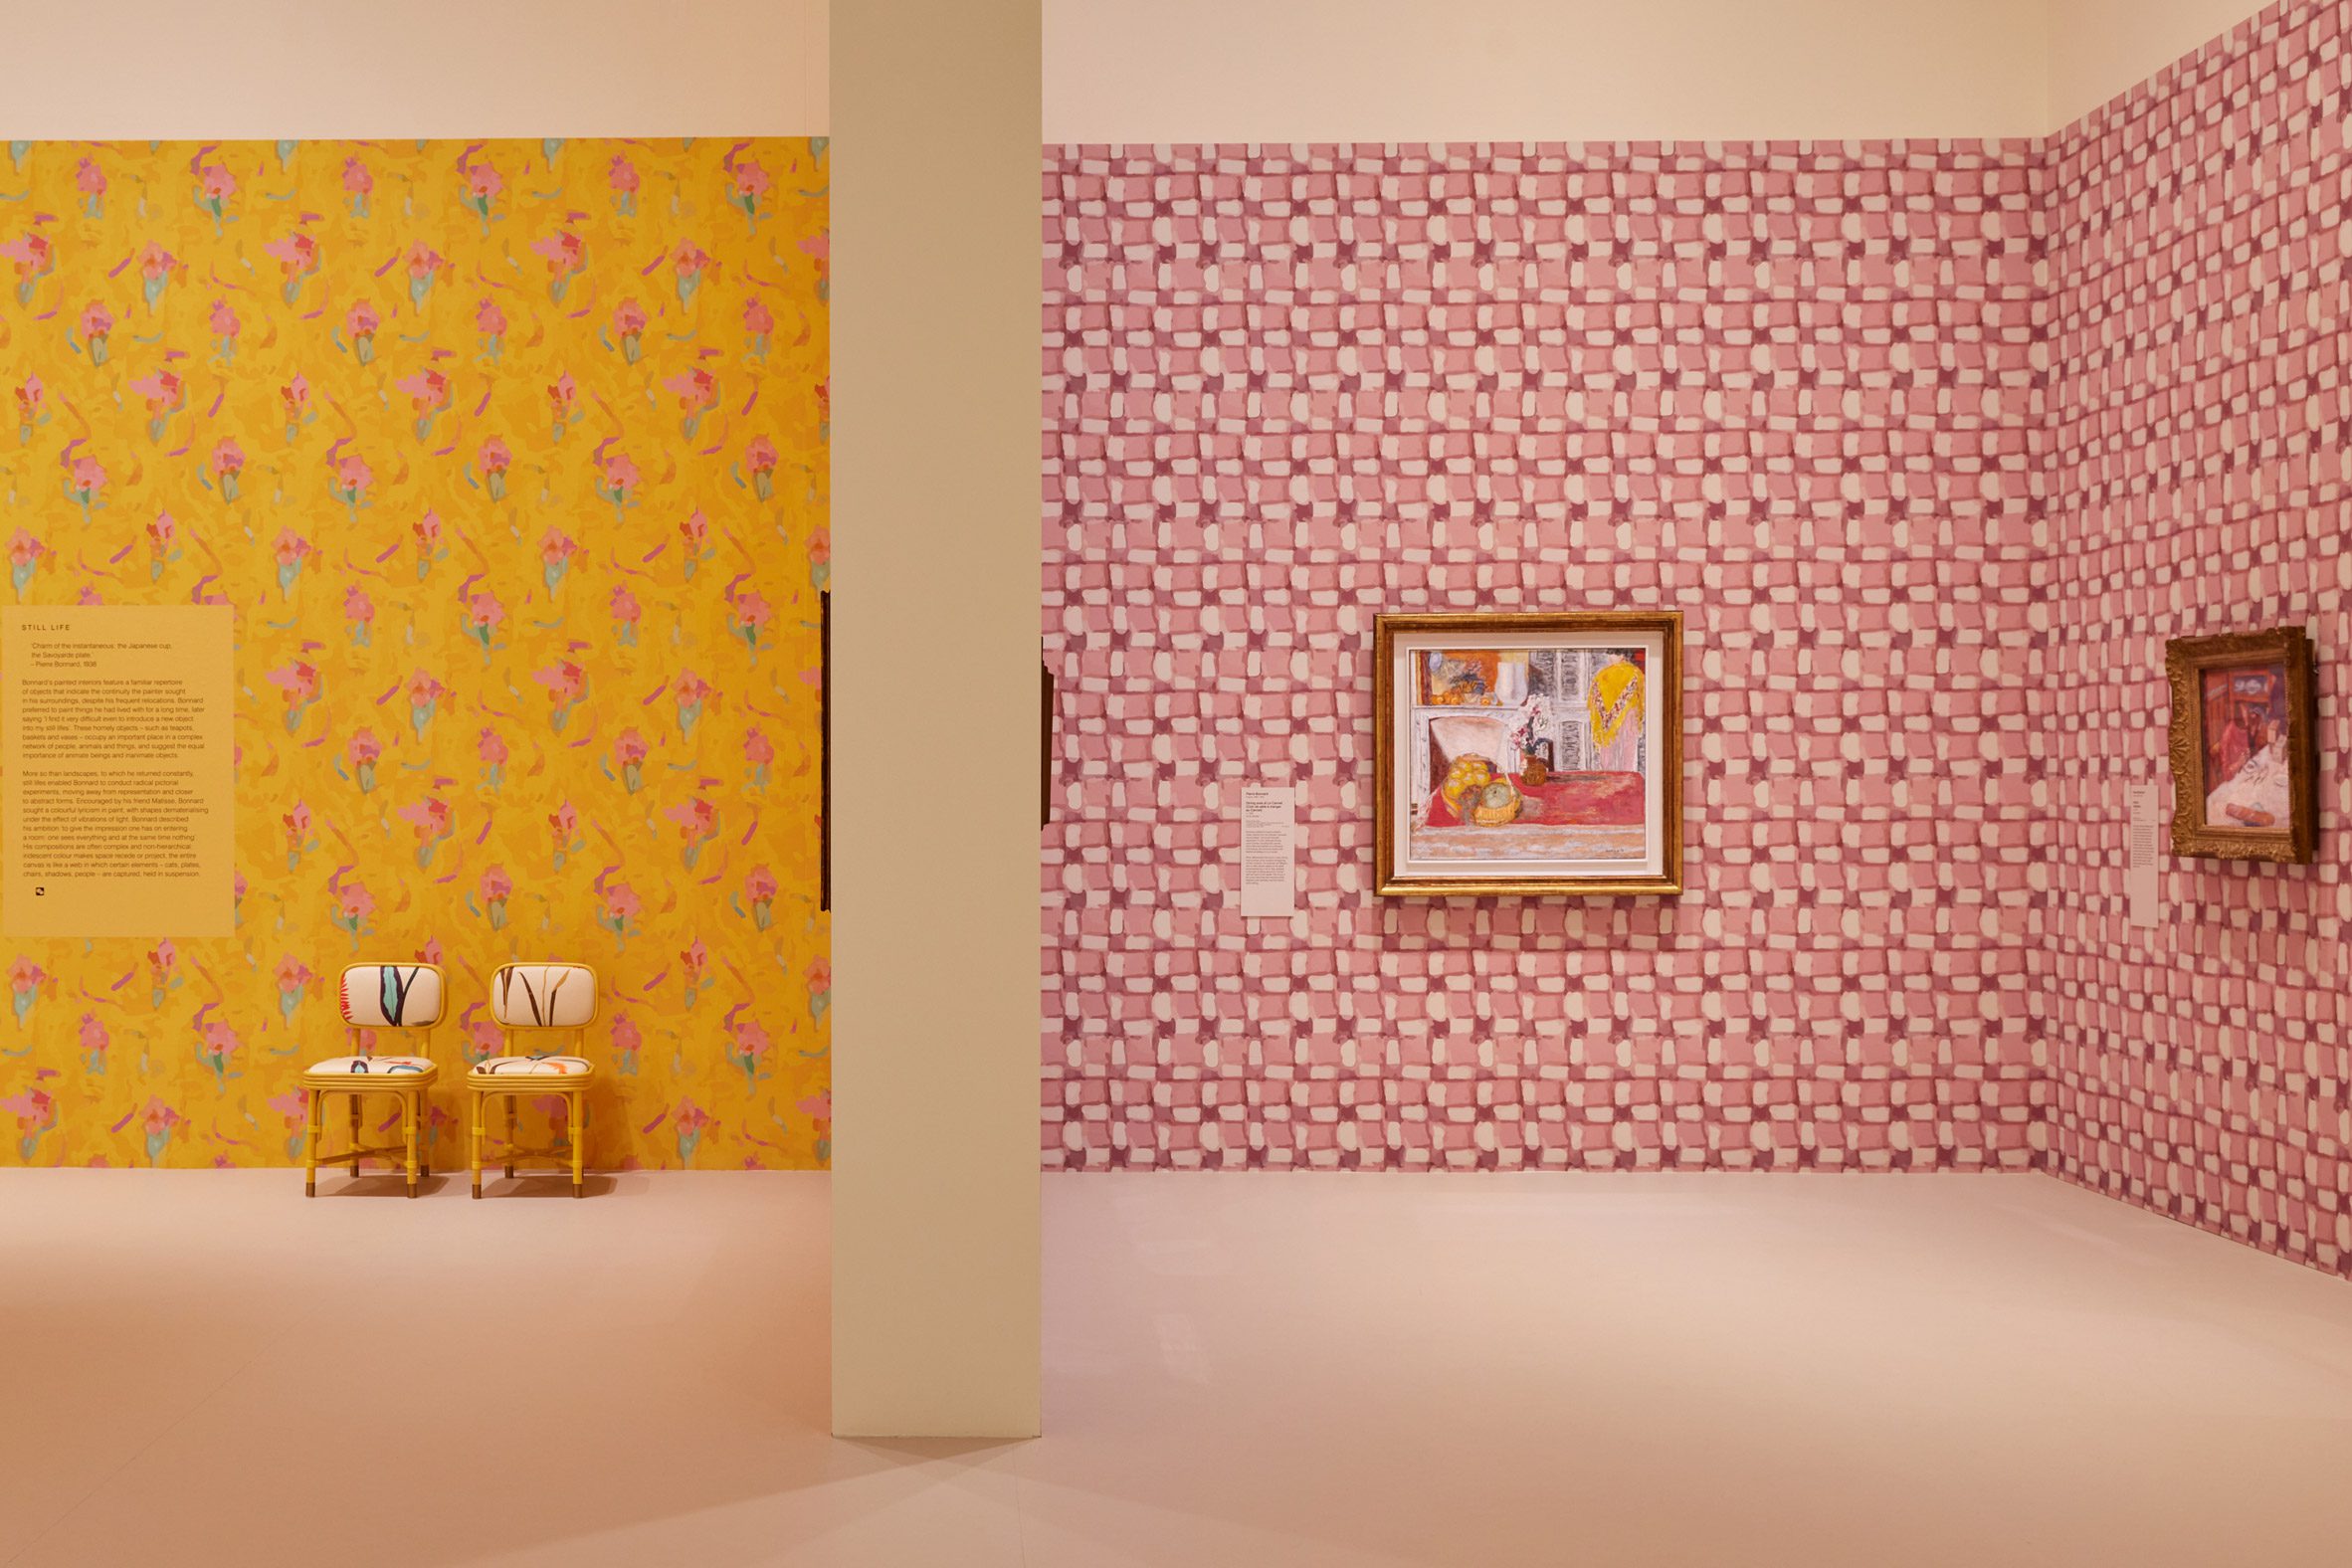 Two gallery spaces: one with yellow walls and the other pink